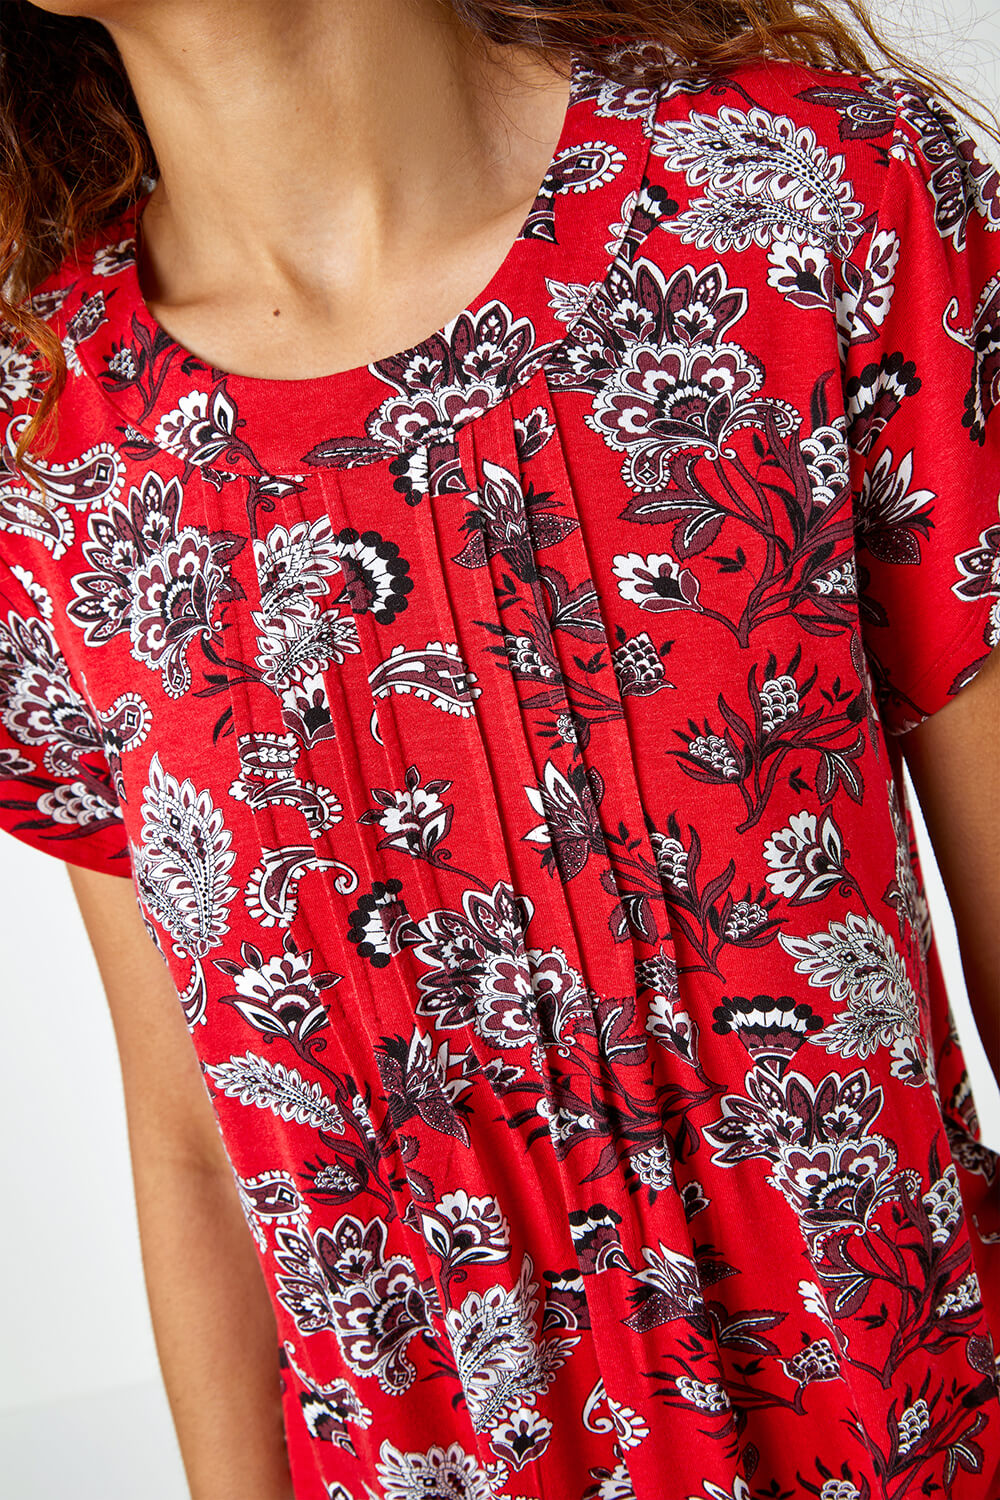 Red Paisley Print Pleat Detail Blouse, Image 5 of 5